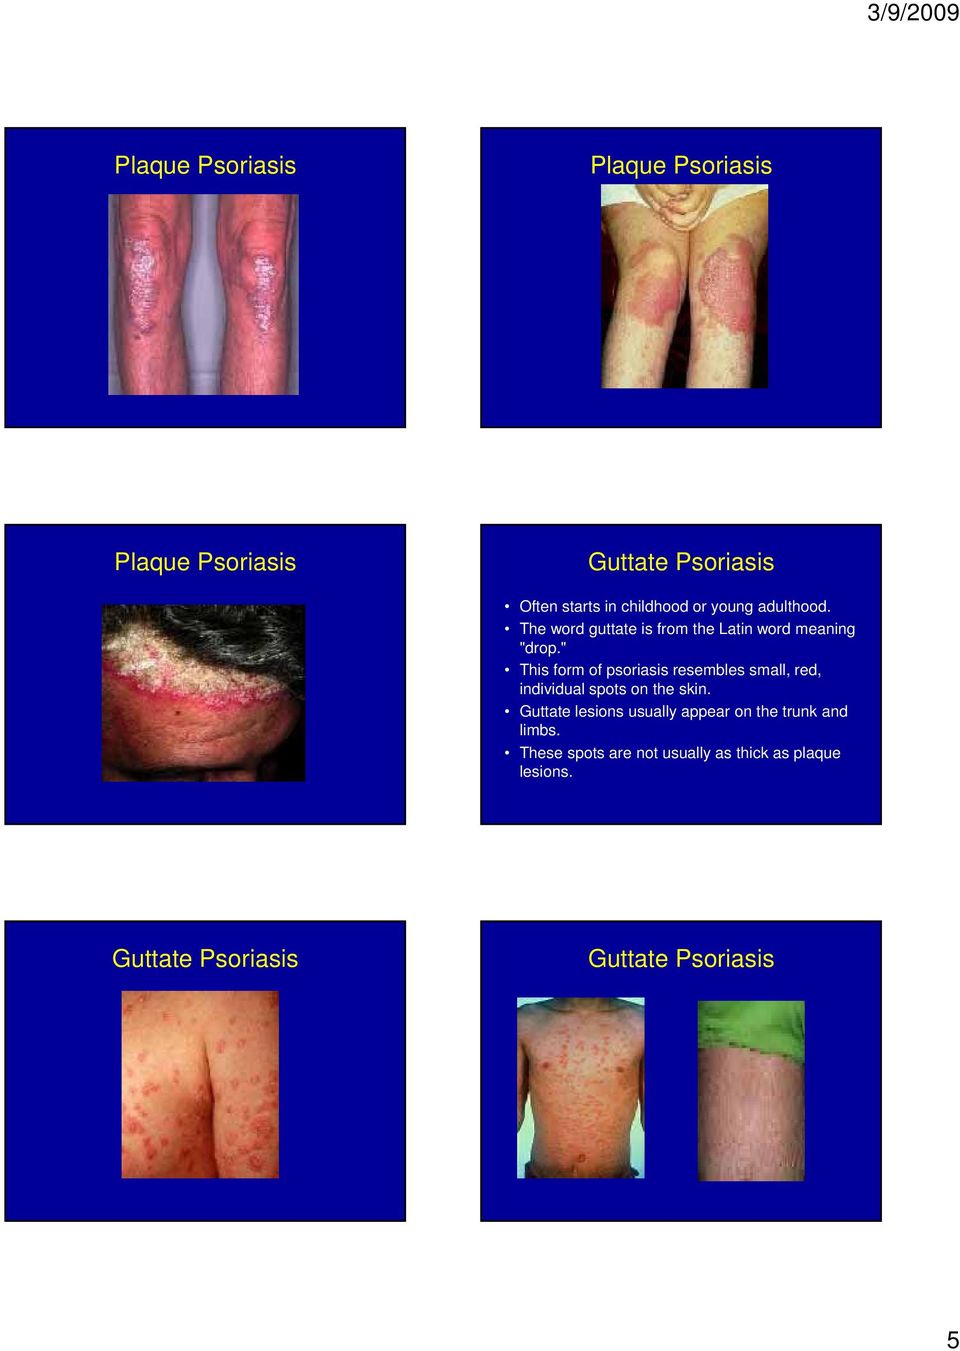 " This form of psoriasis resembles small, red, individual spots on the skin.